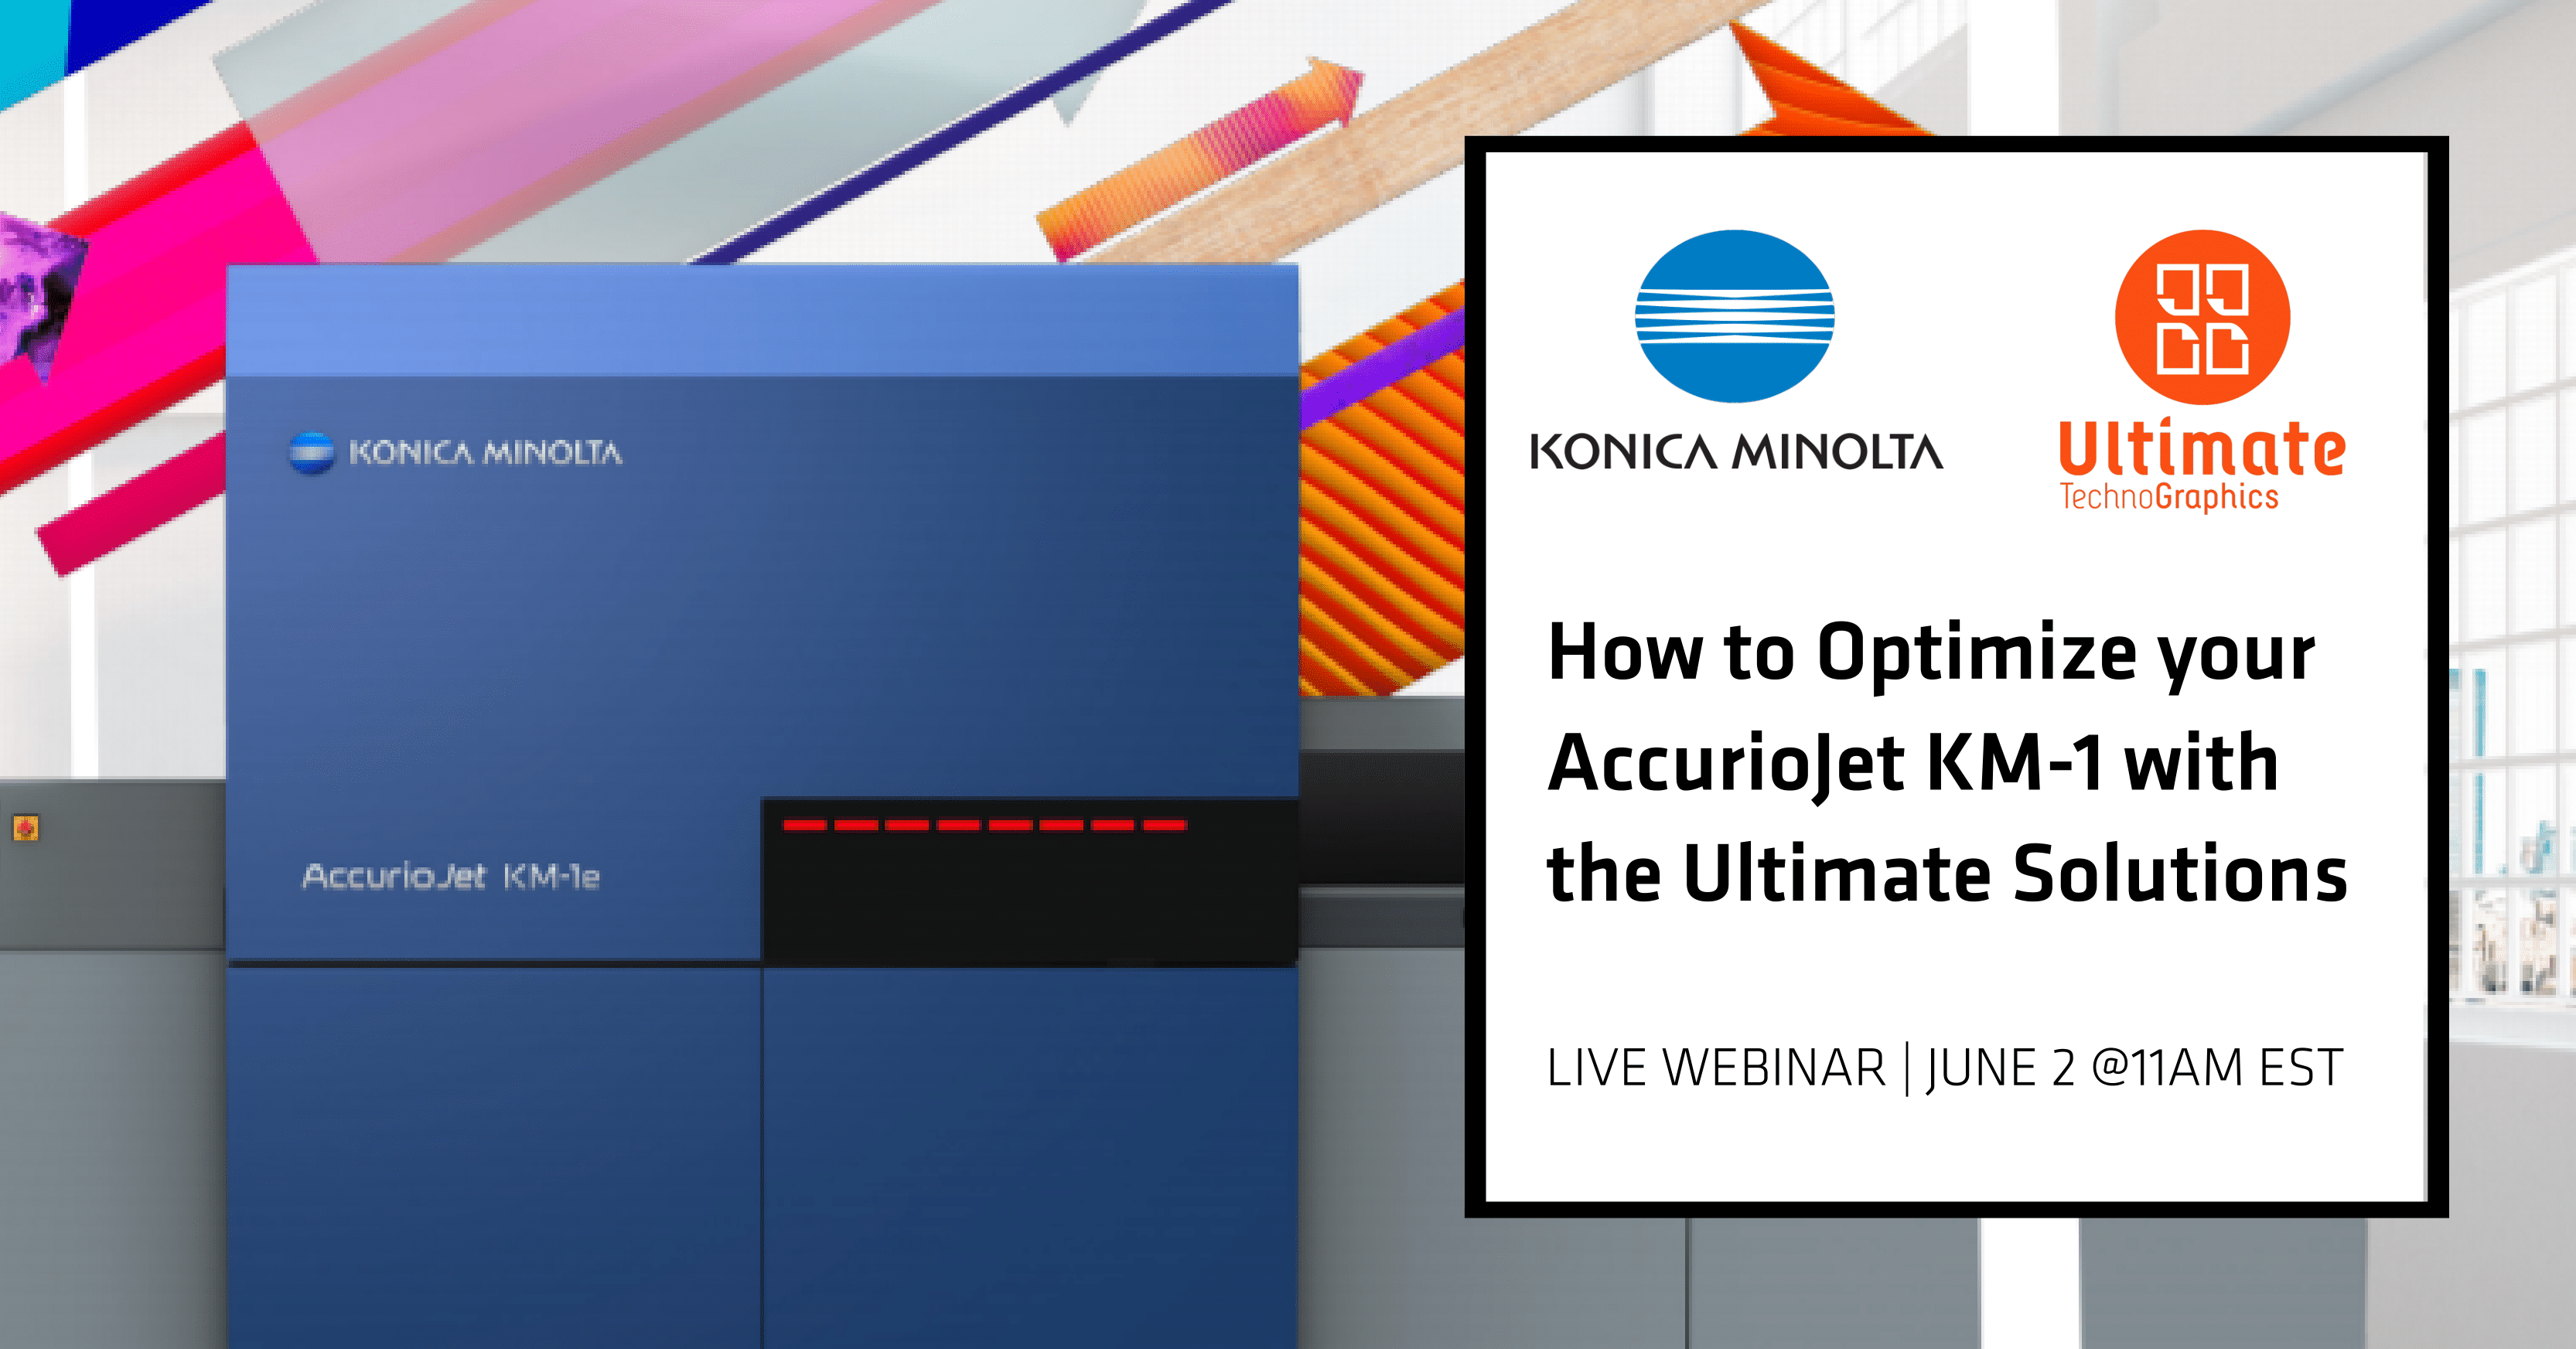 Ultimate Technographics - How to Optimize your AccurioJet KM-1 with the Ultimate Solutions